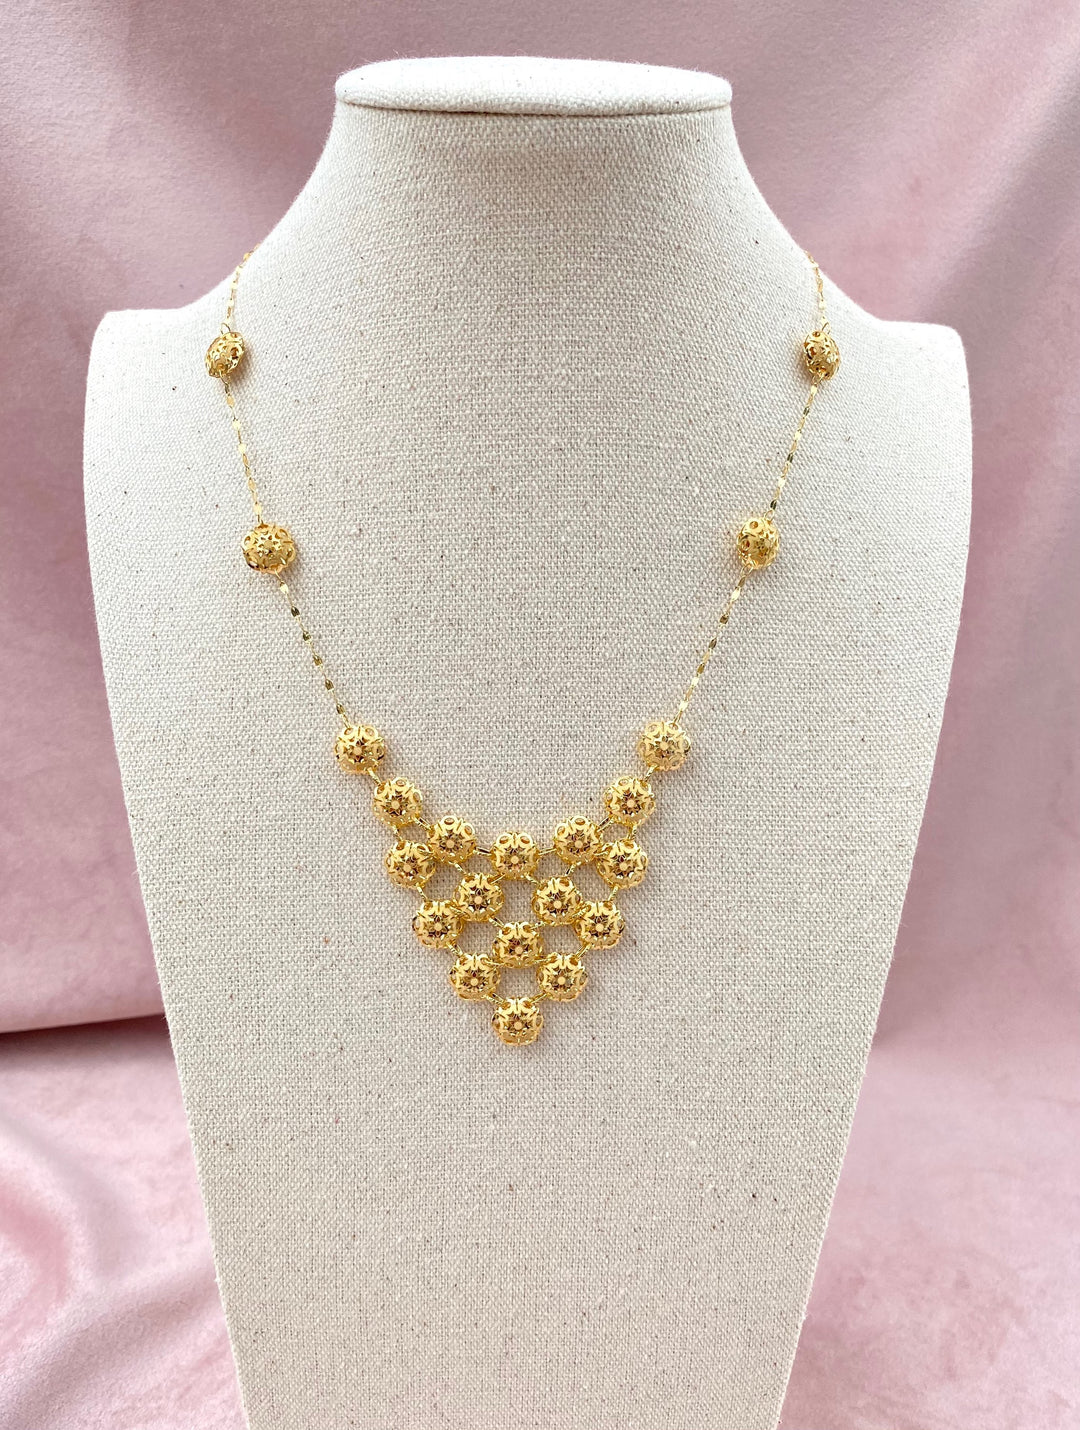 Italian Bib Honeycomb Necklace in 14k Solid Yellow Gold